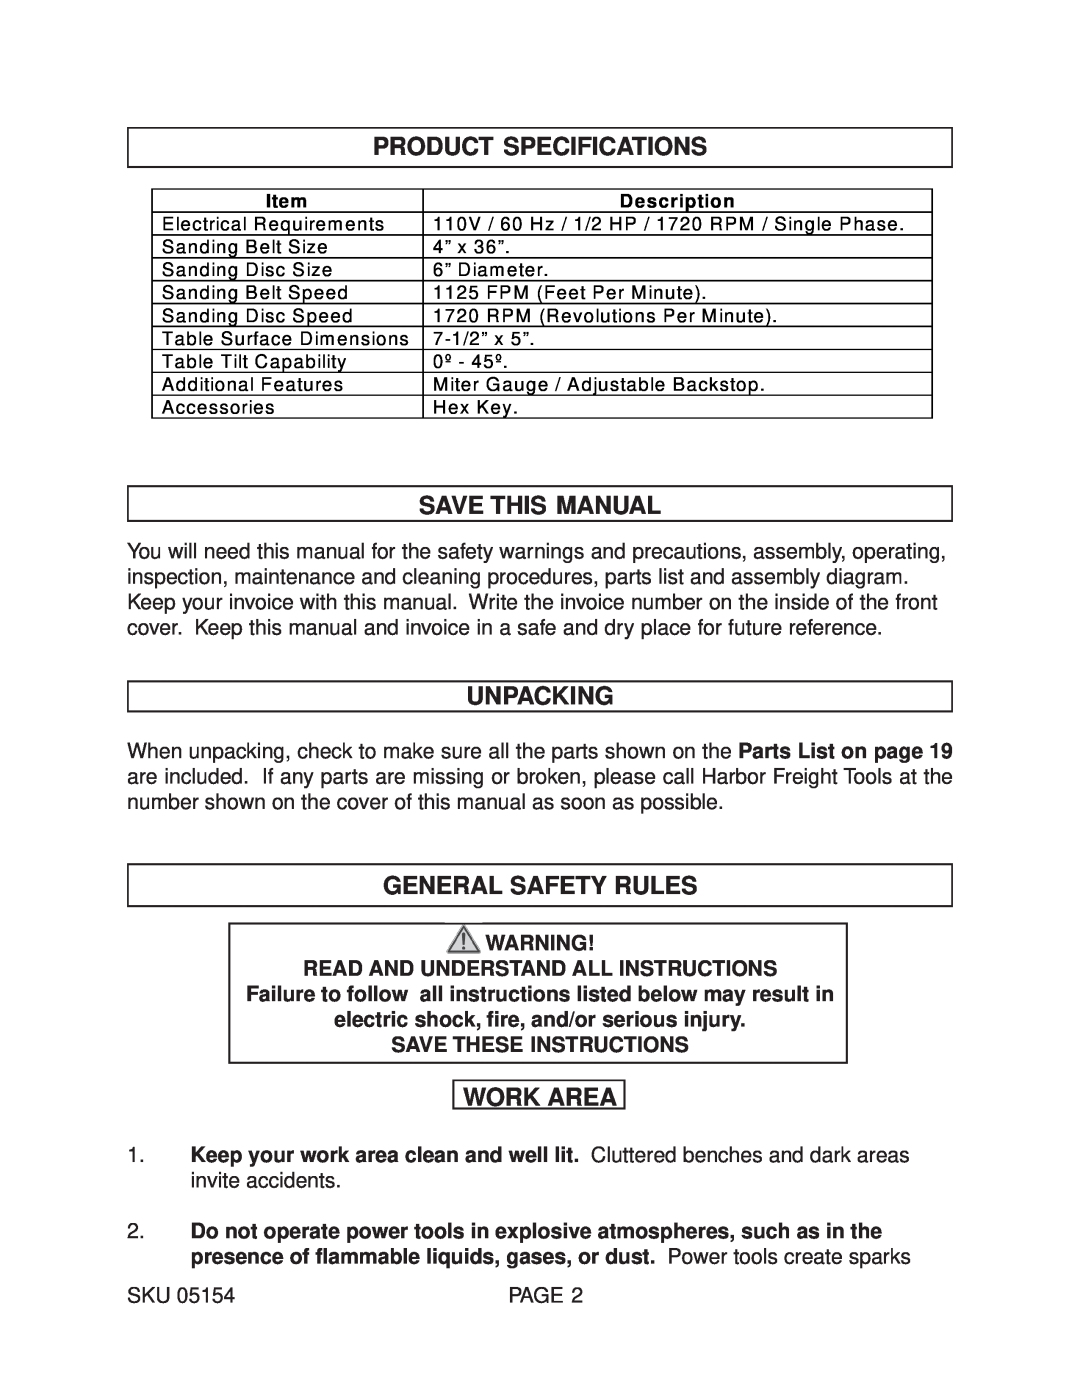 Harbor Freight Tools 05154 Product Specifications, Save This Manual, Unpacking, General Safety Rules, Work Area 